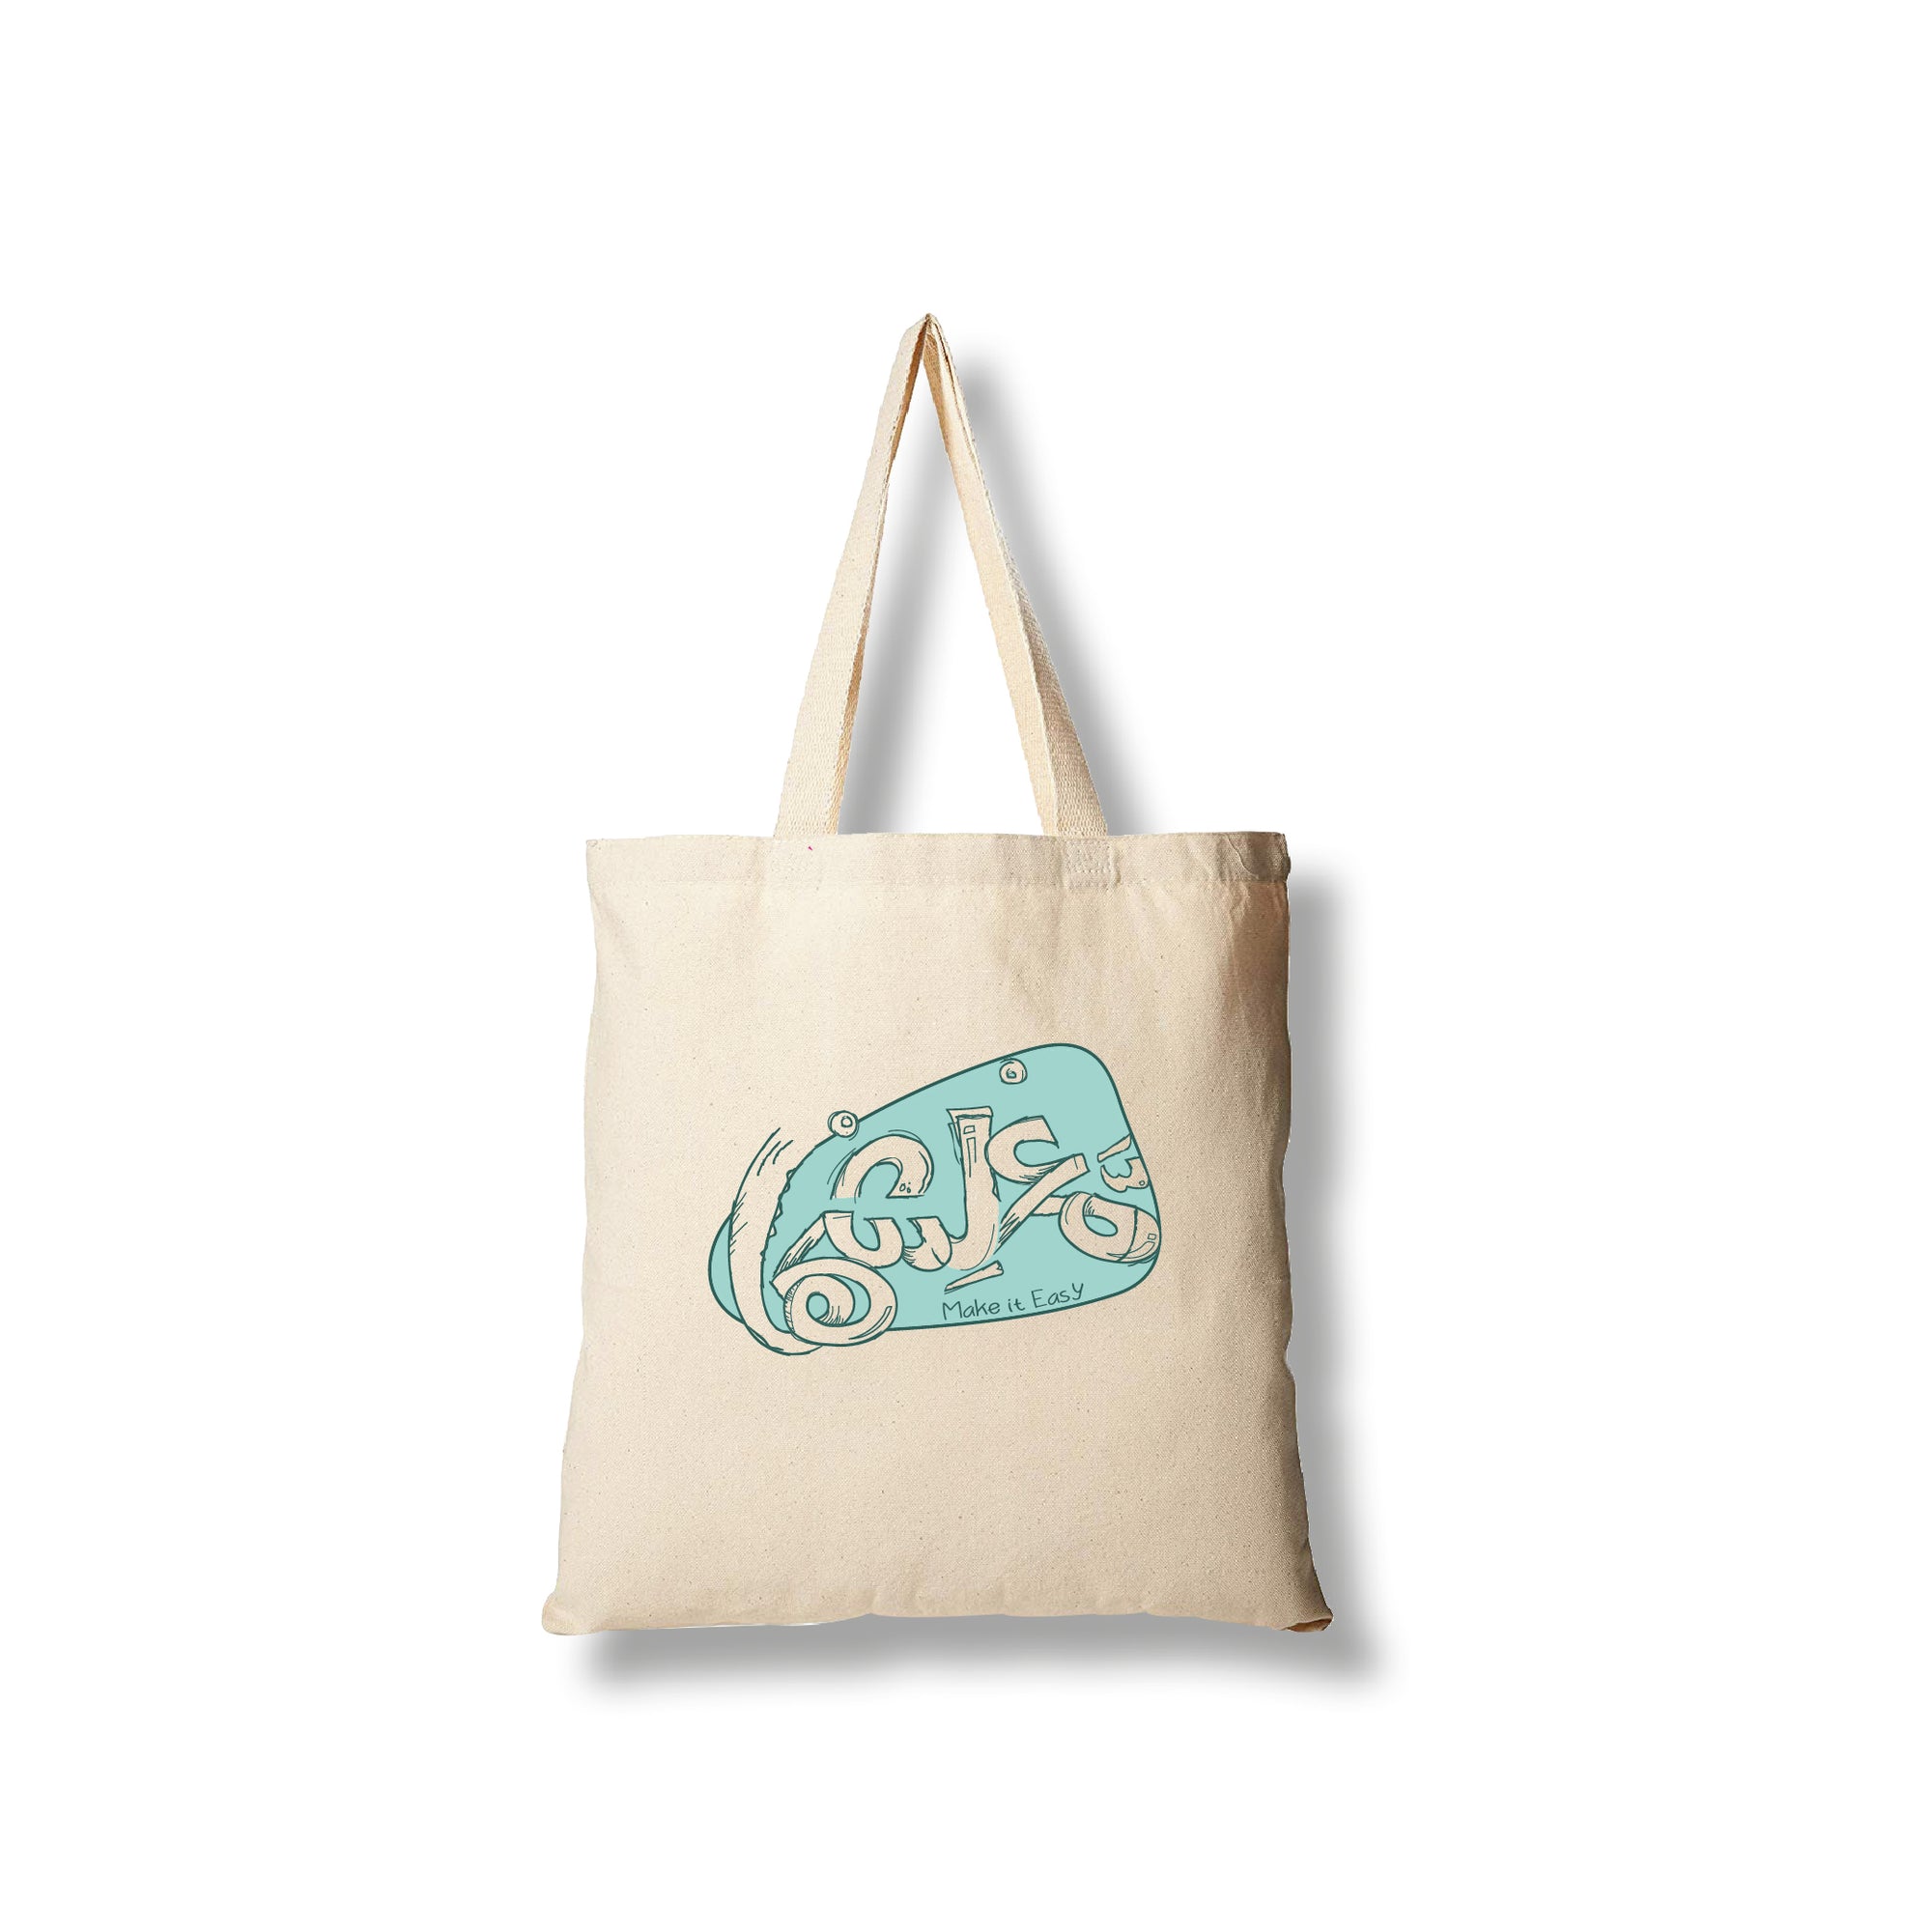 Tote bag - معلشها